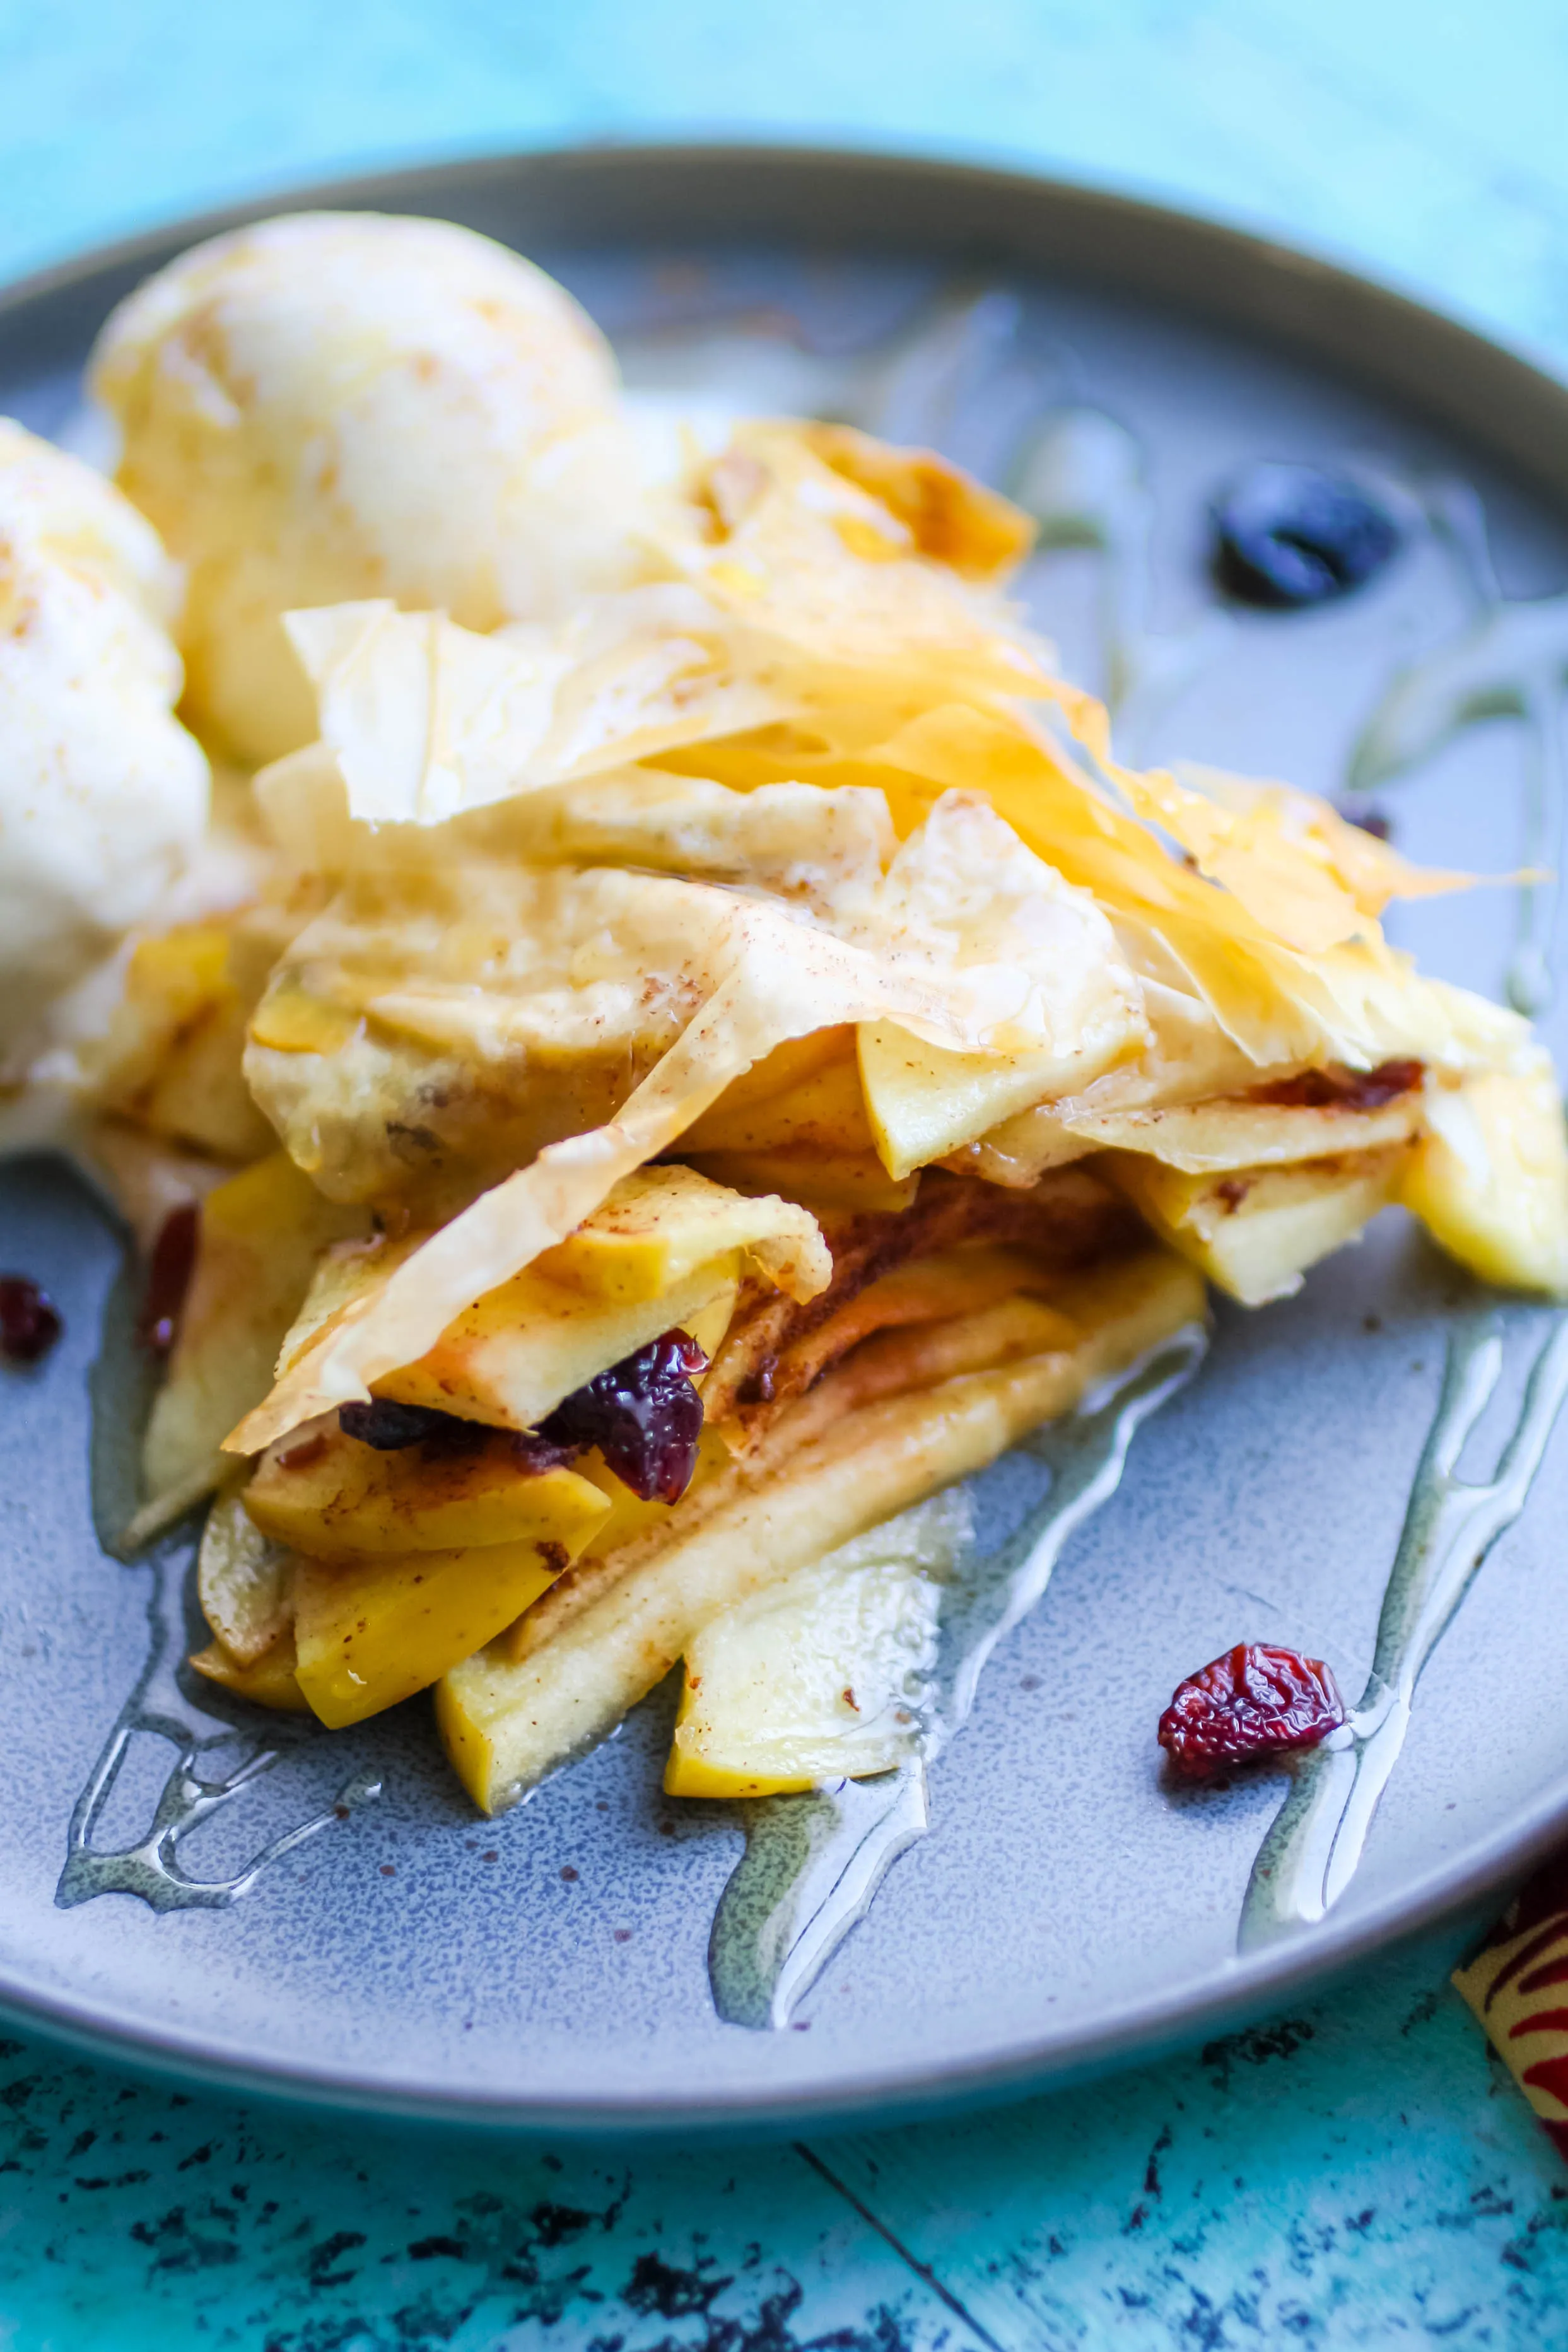 Apple-Cranberry Tart in Phyllo is flaky and fabulous as dessert! Apple-Cranberry Tart in Phyllo is a tasty treat that's flaky and fun!